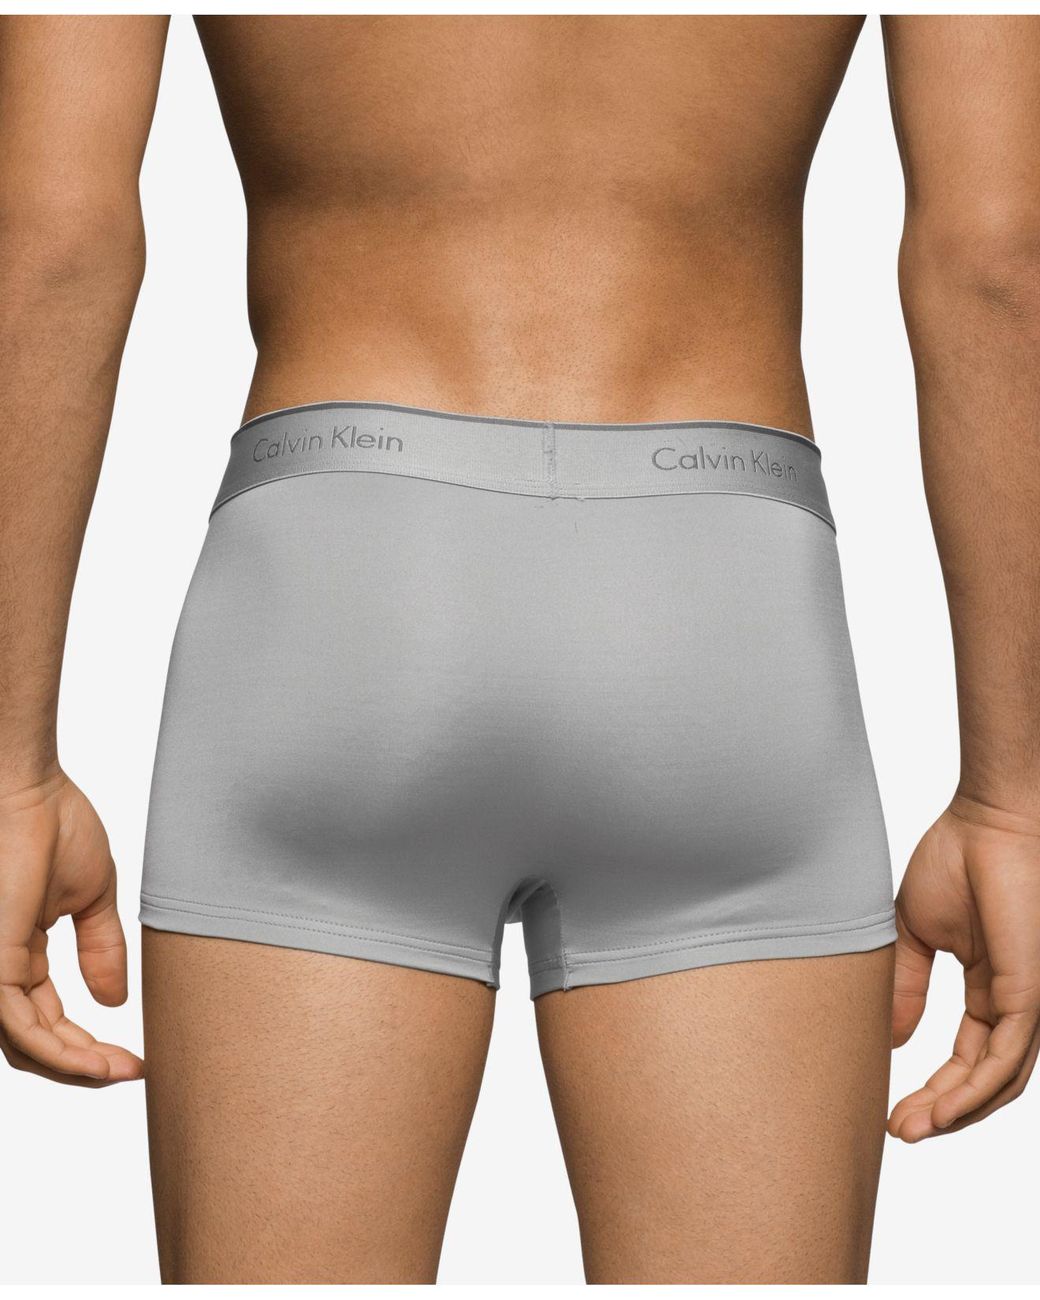 Calvin Klein Nb1289 Microfiber Stretch Low Rise Trunks in Gray for